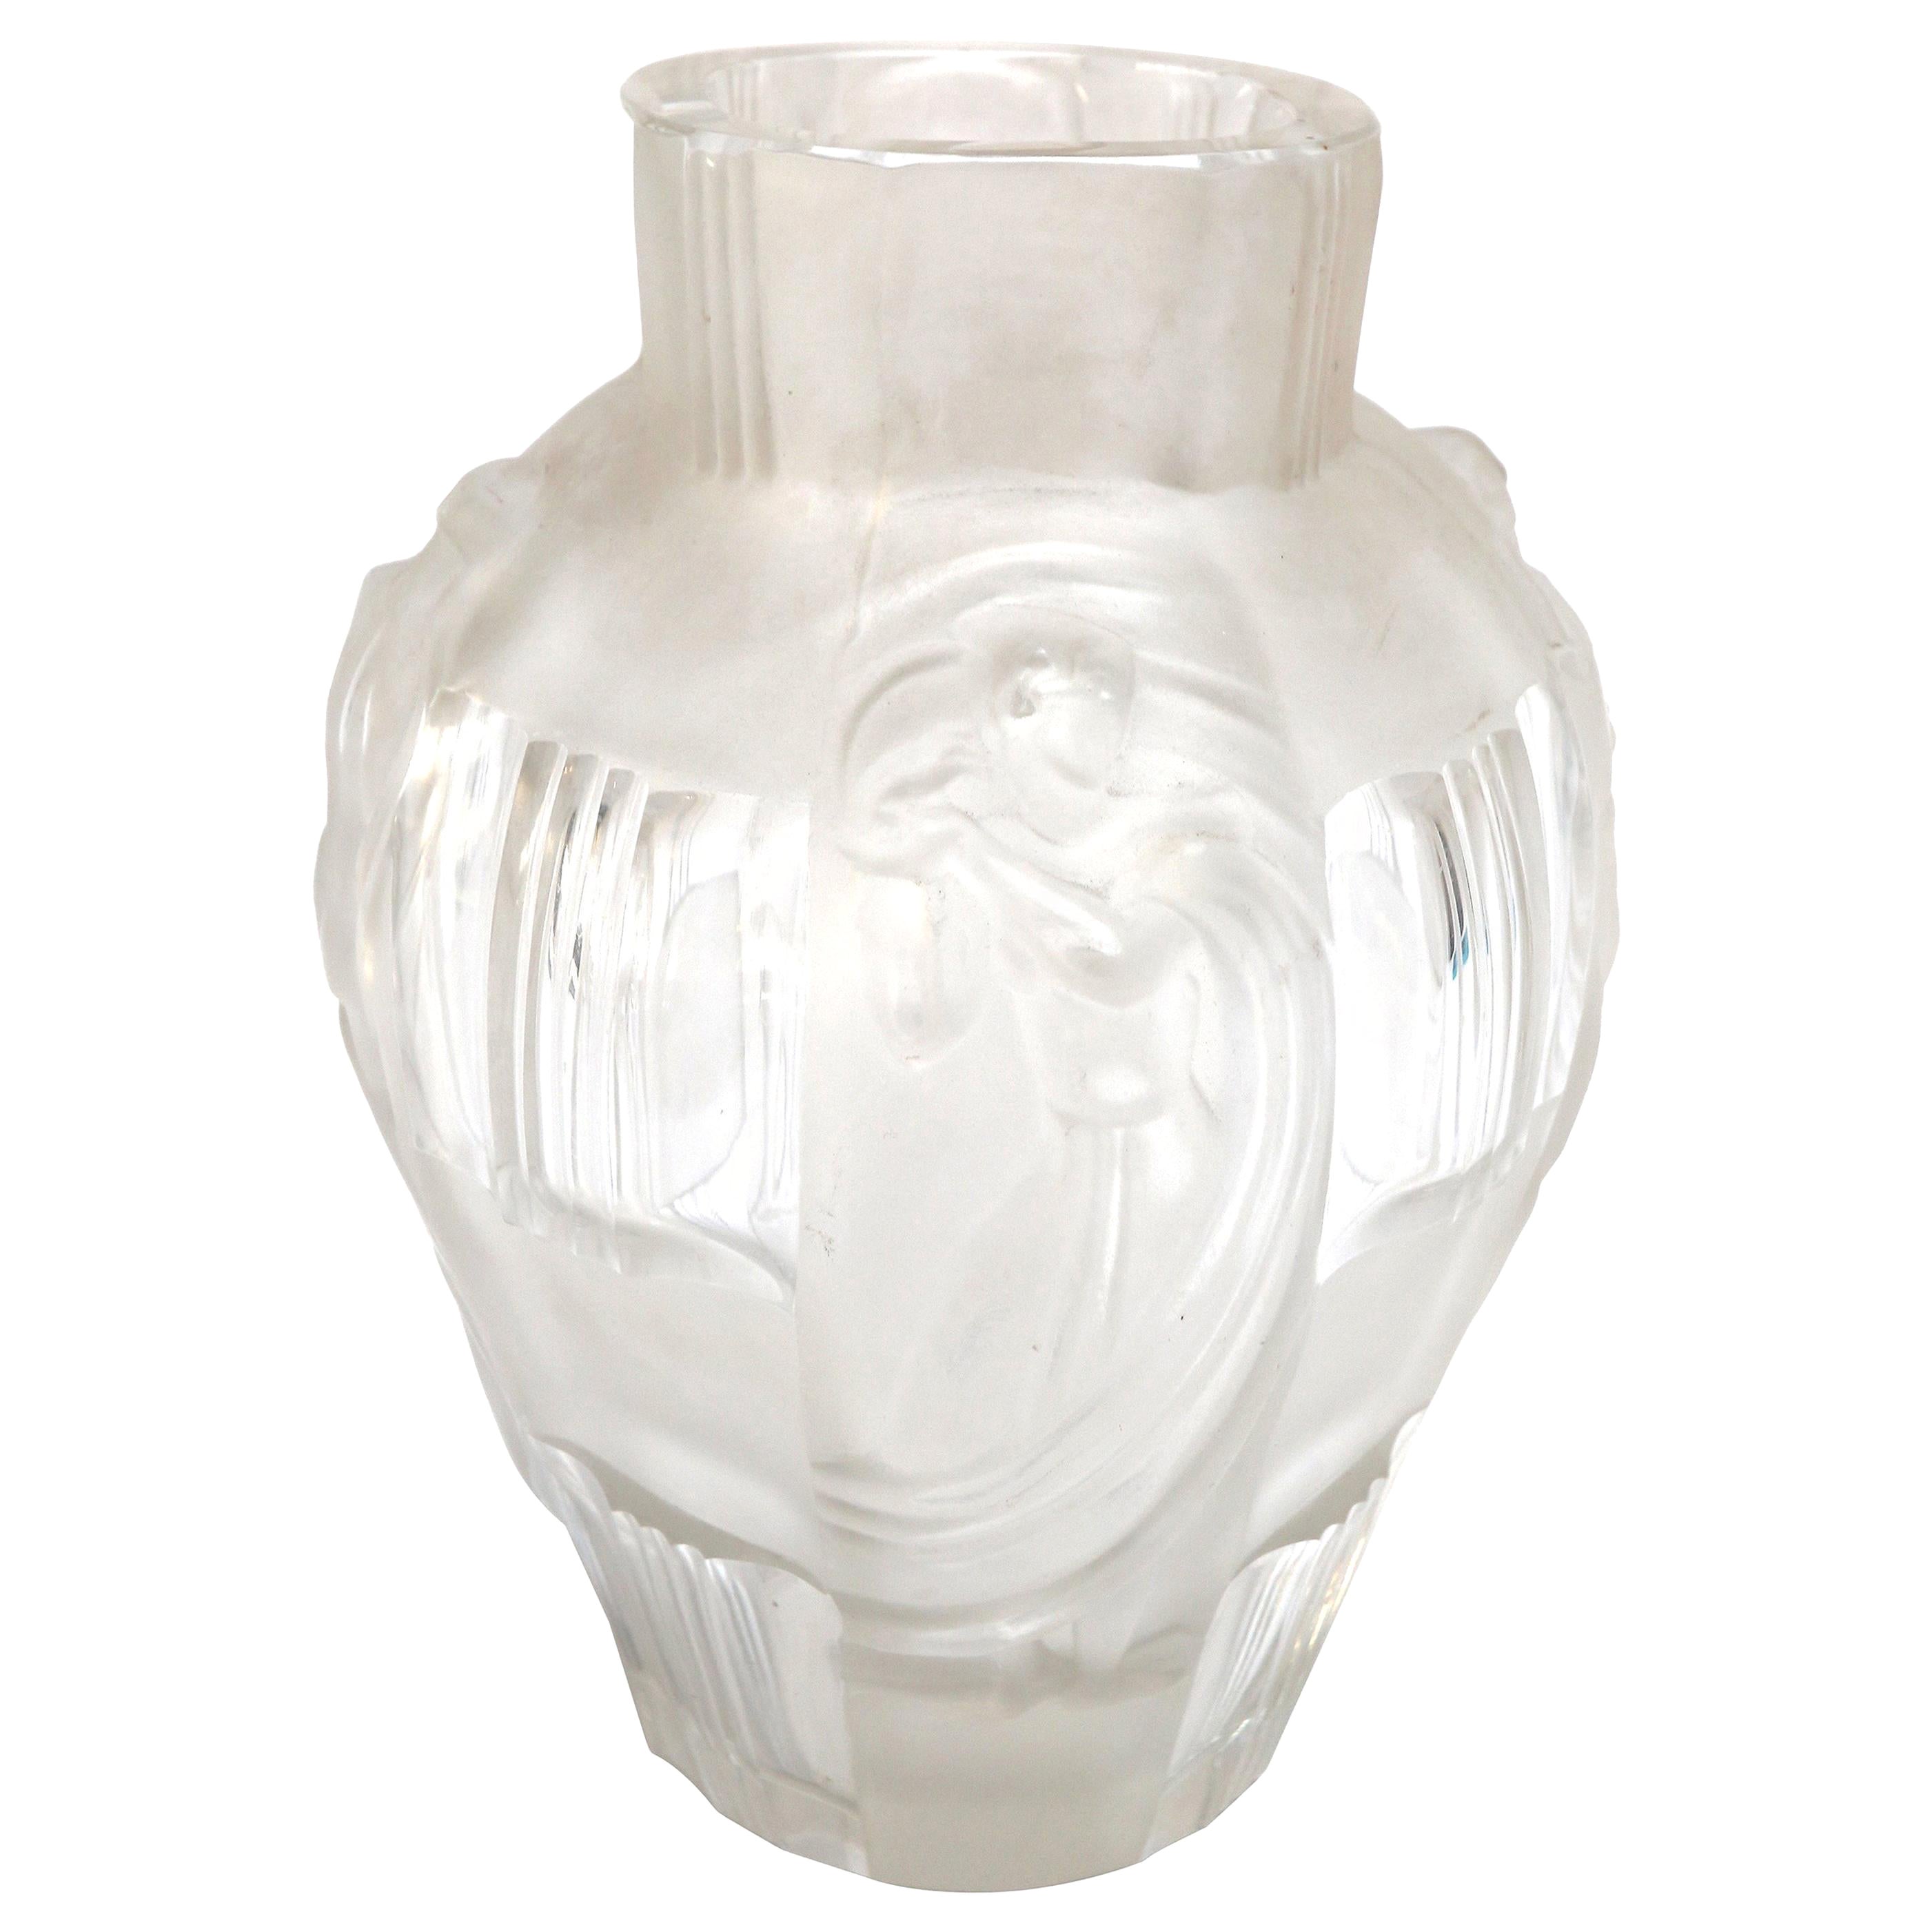 Art Deco Ingrid Glass Vase with Female Figures by Curt Schlevogt, circa 1930s For Sale